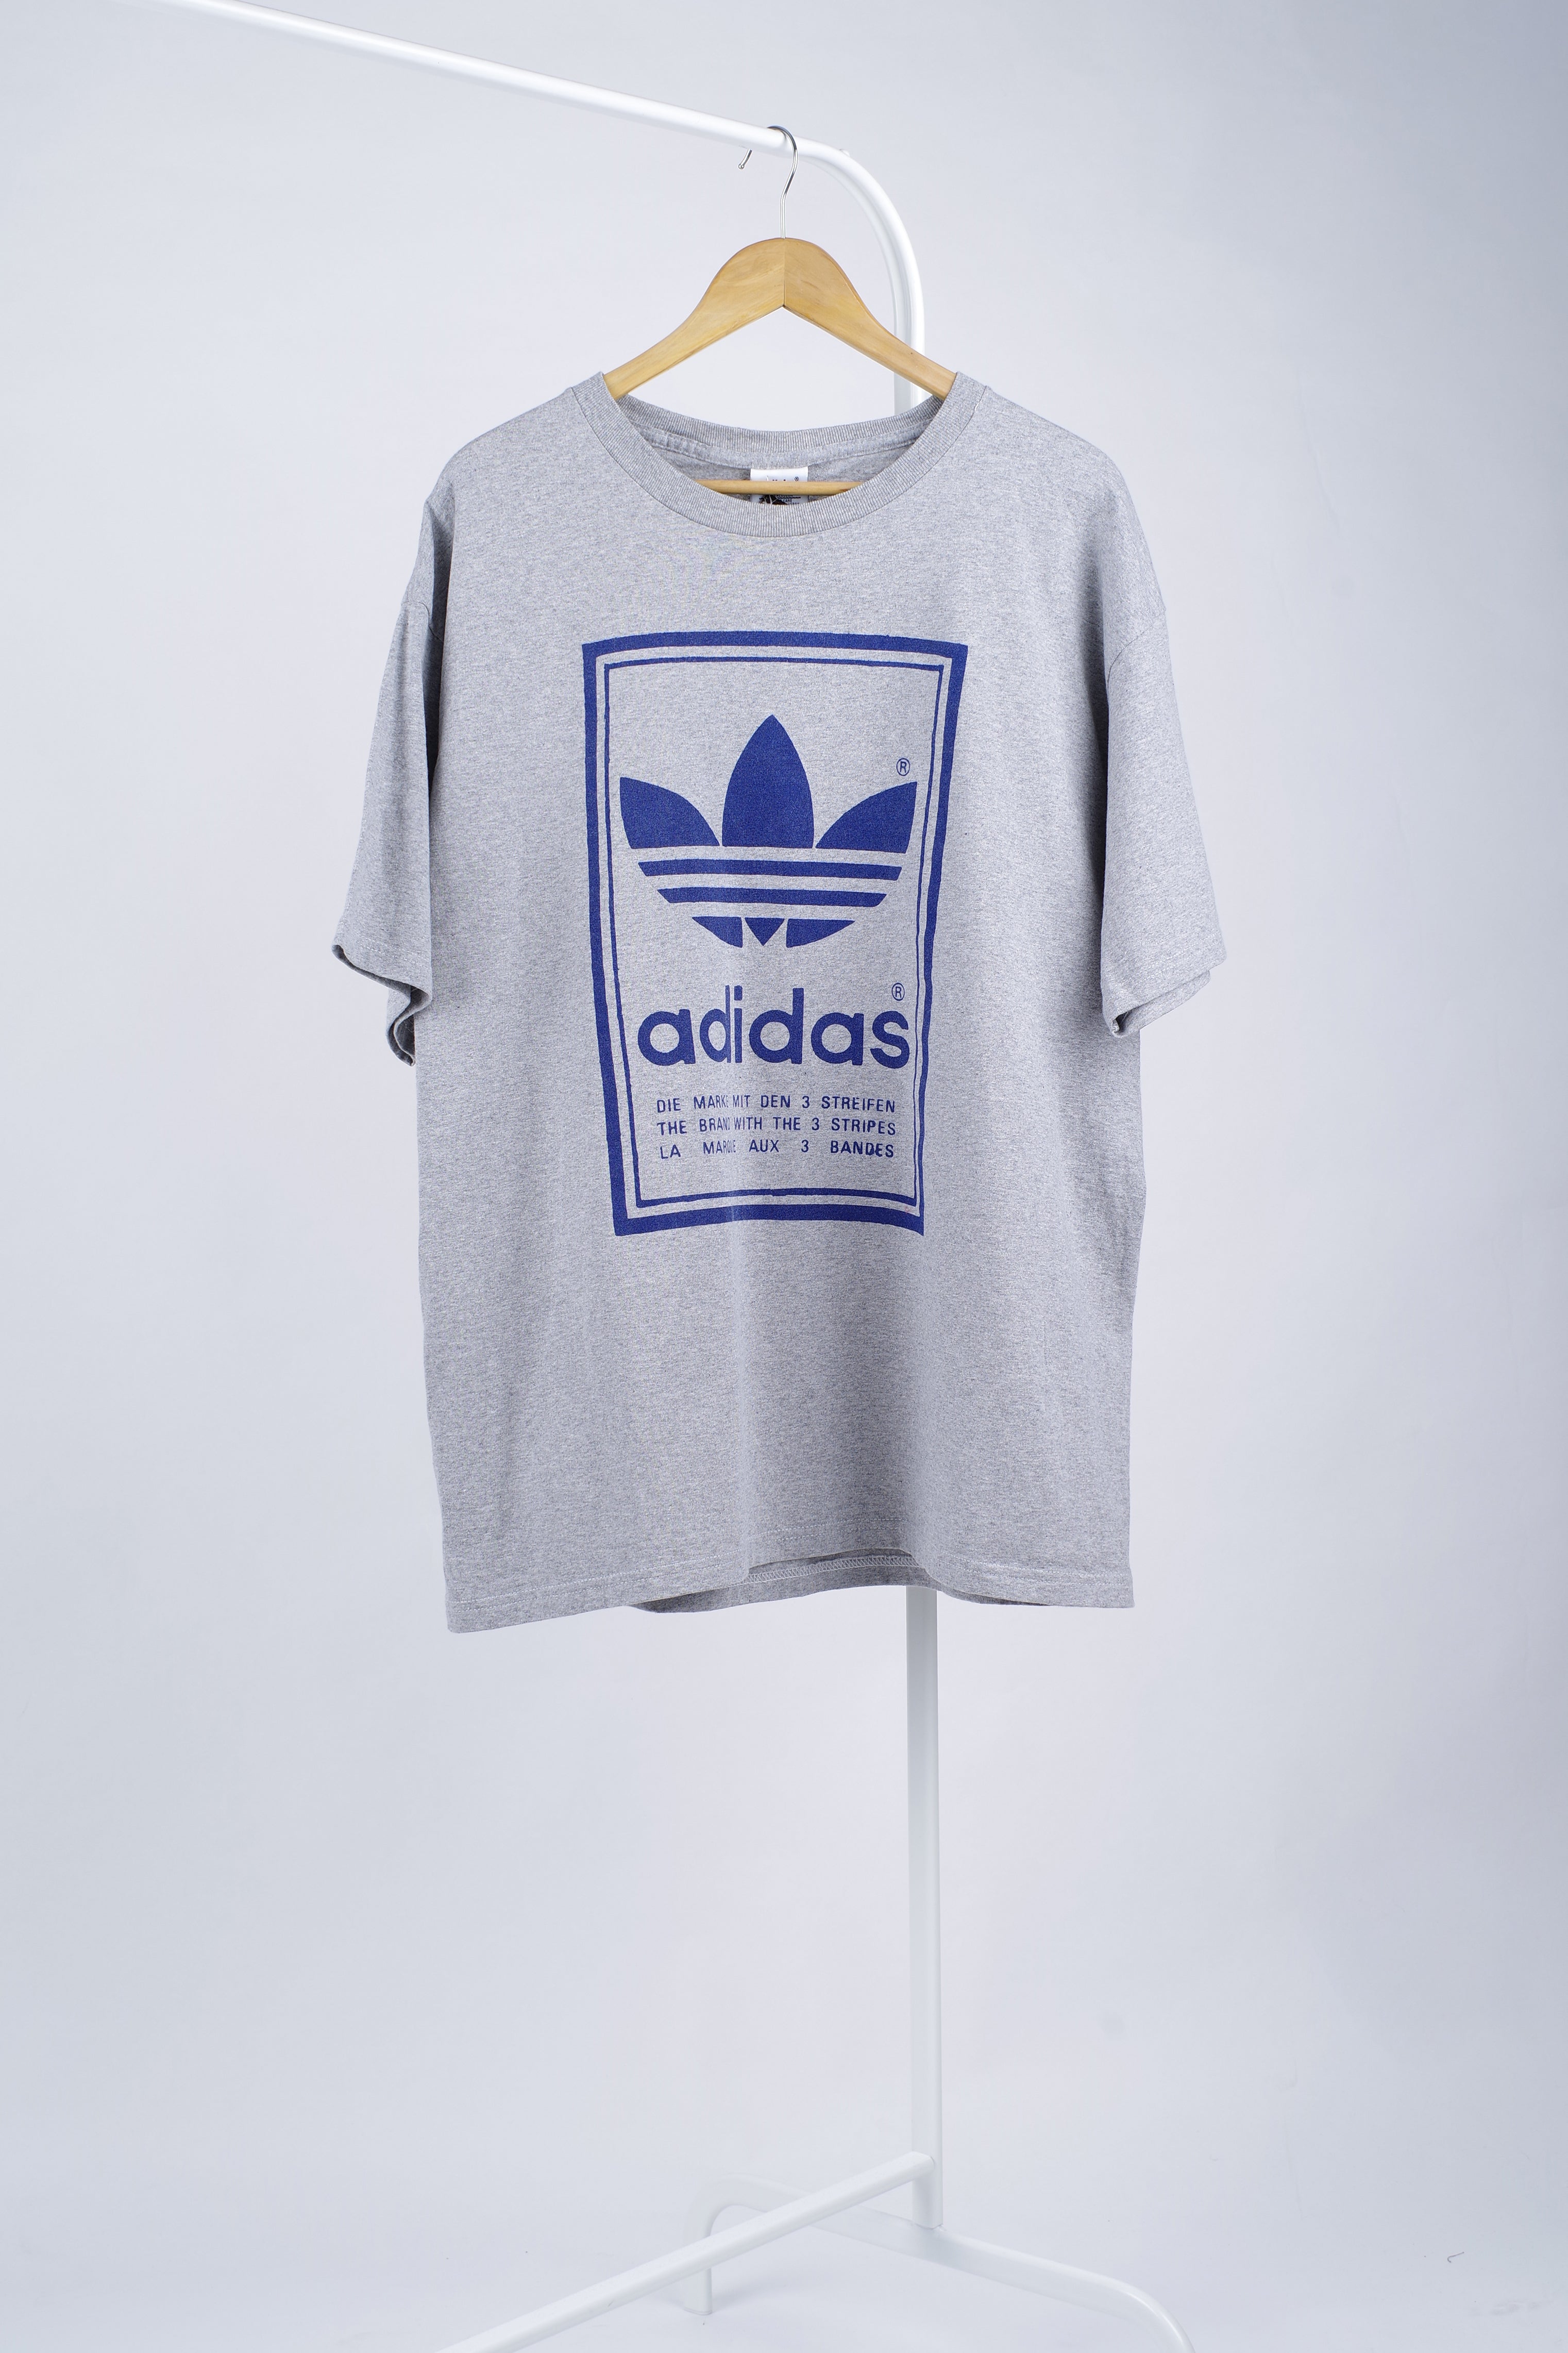 Lim I Gamle tider Vintage Made in USA Adidas Originals Gray T-shirt, Size men's L –  SecondFirst